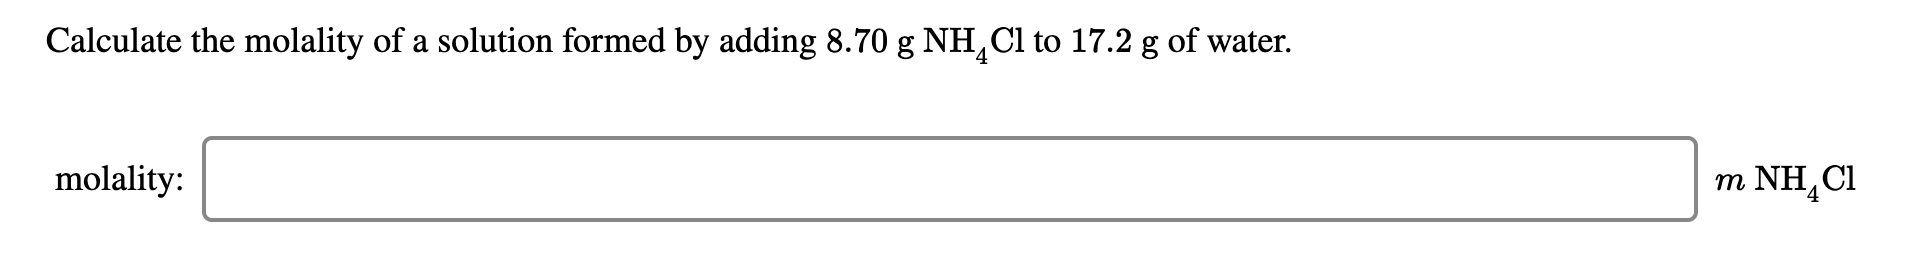 Calculate the molality of a solution formed by adding 8.70 g NH,Cl to 17.2 g of water.
molality:
m NH,CI
